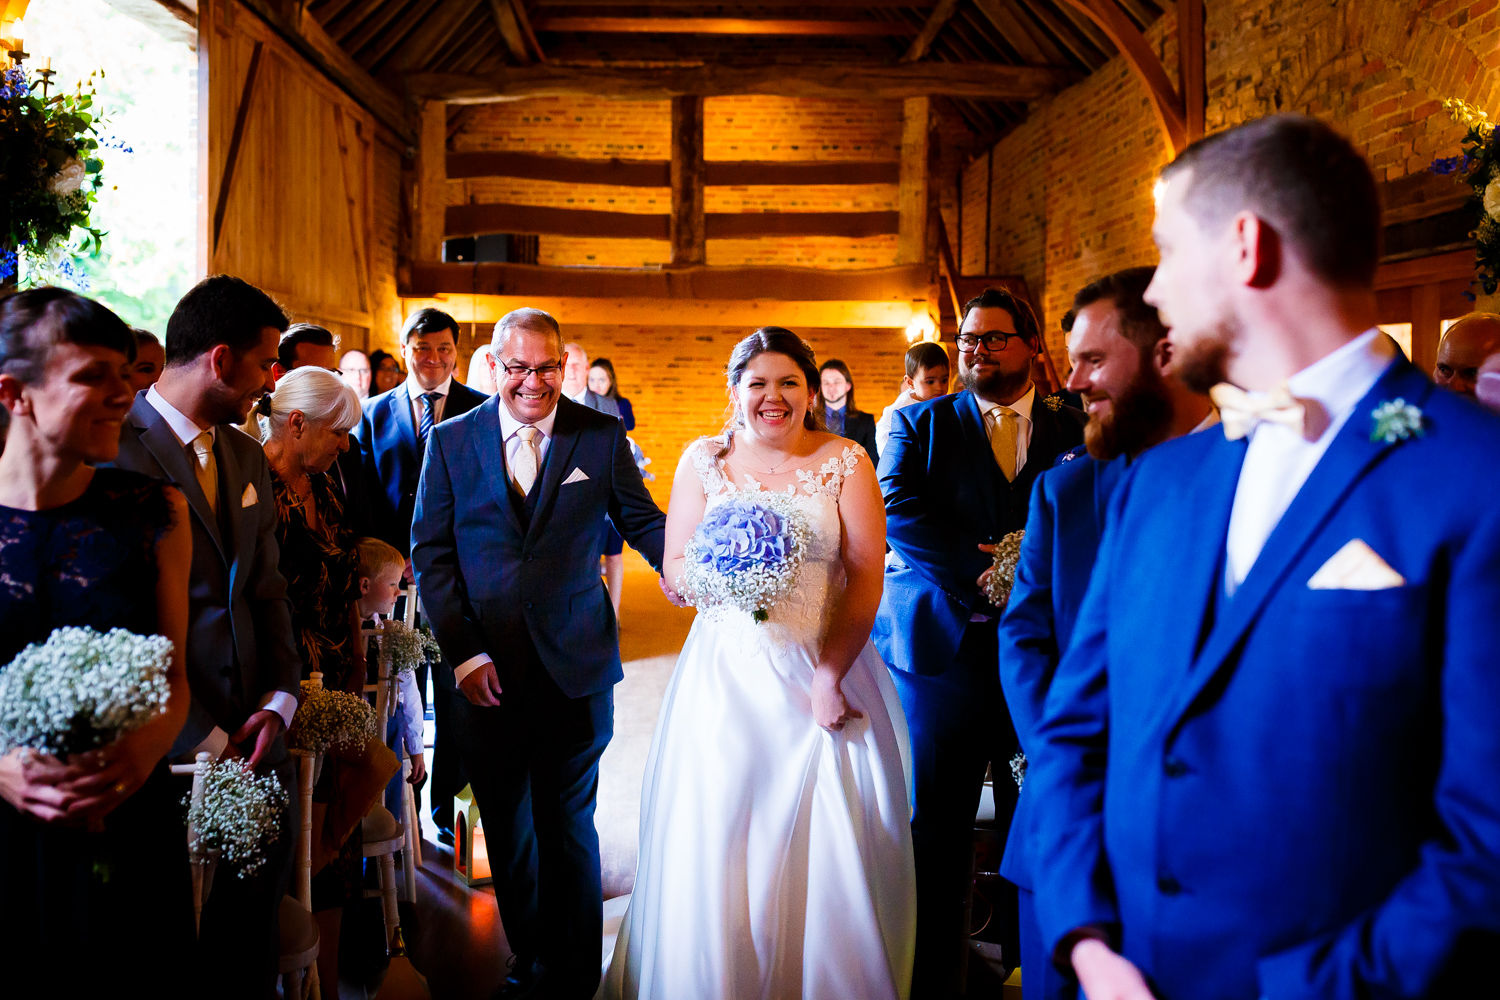 The beautiful brides walking down the aisle with her dad